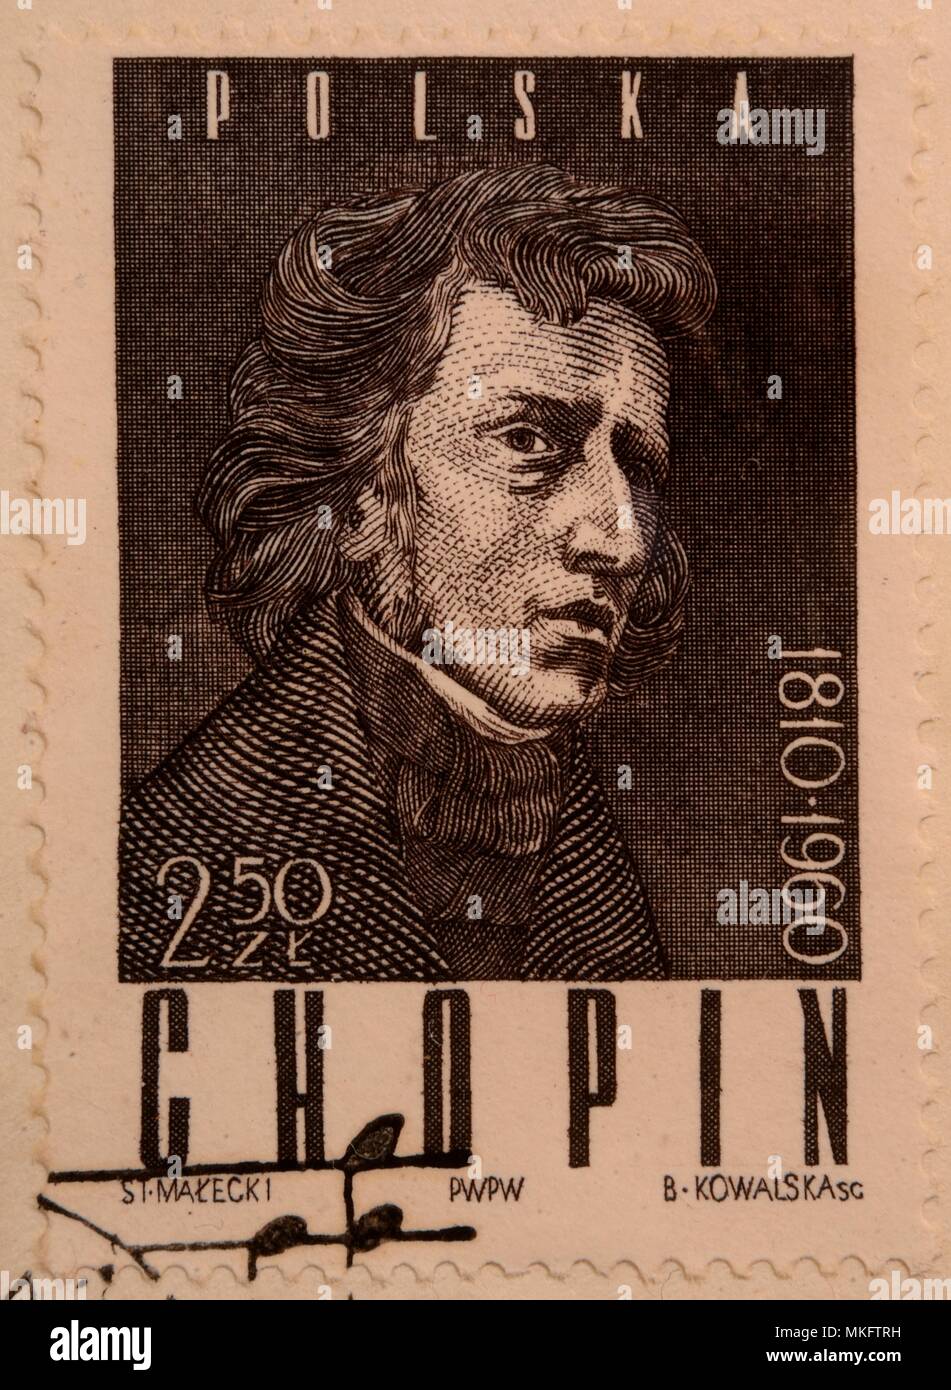 Frederic Chopin, a Polish composer and virtuoso pianist, portrait on a Polish stamp Stock Photo